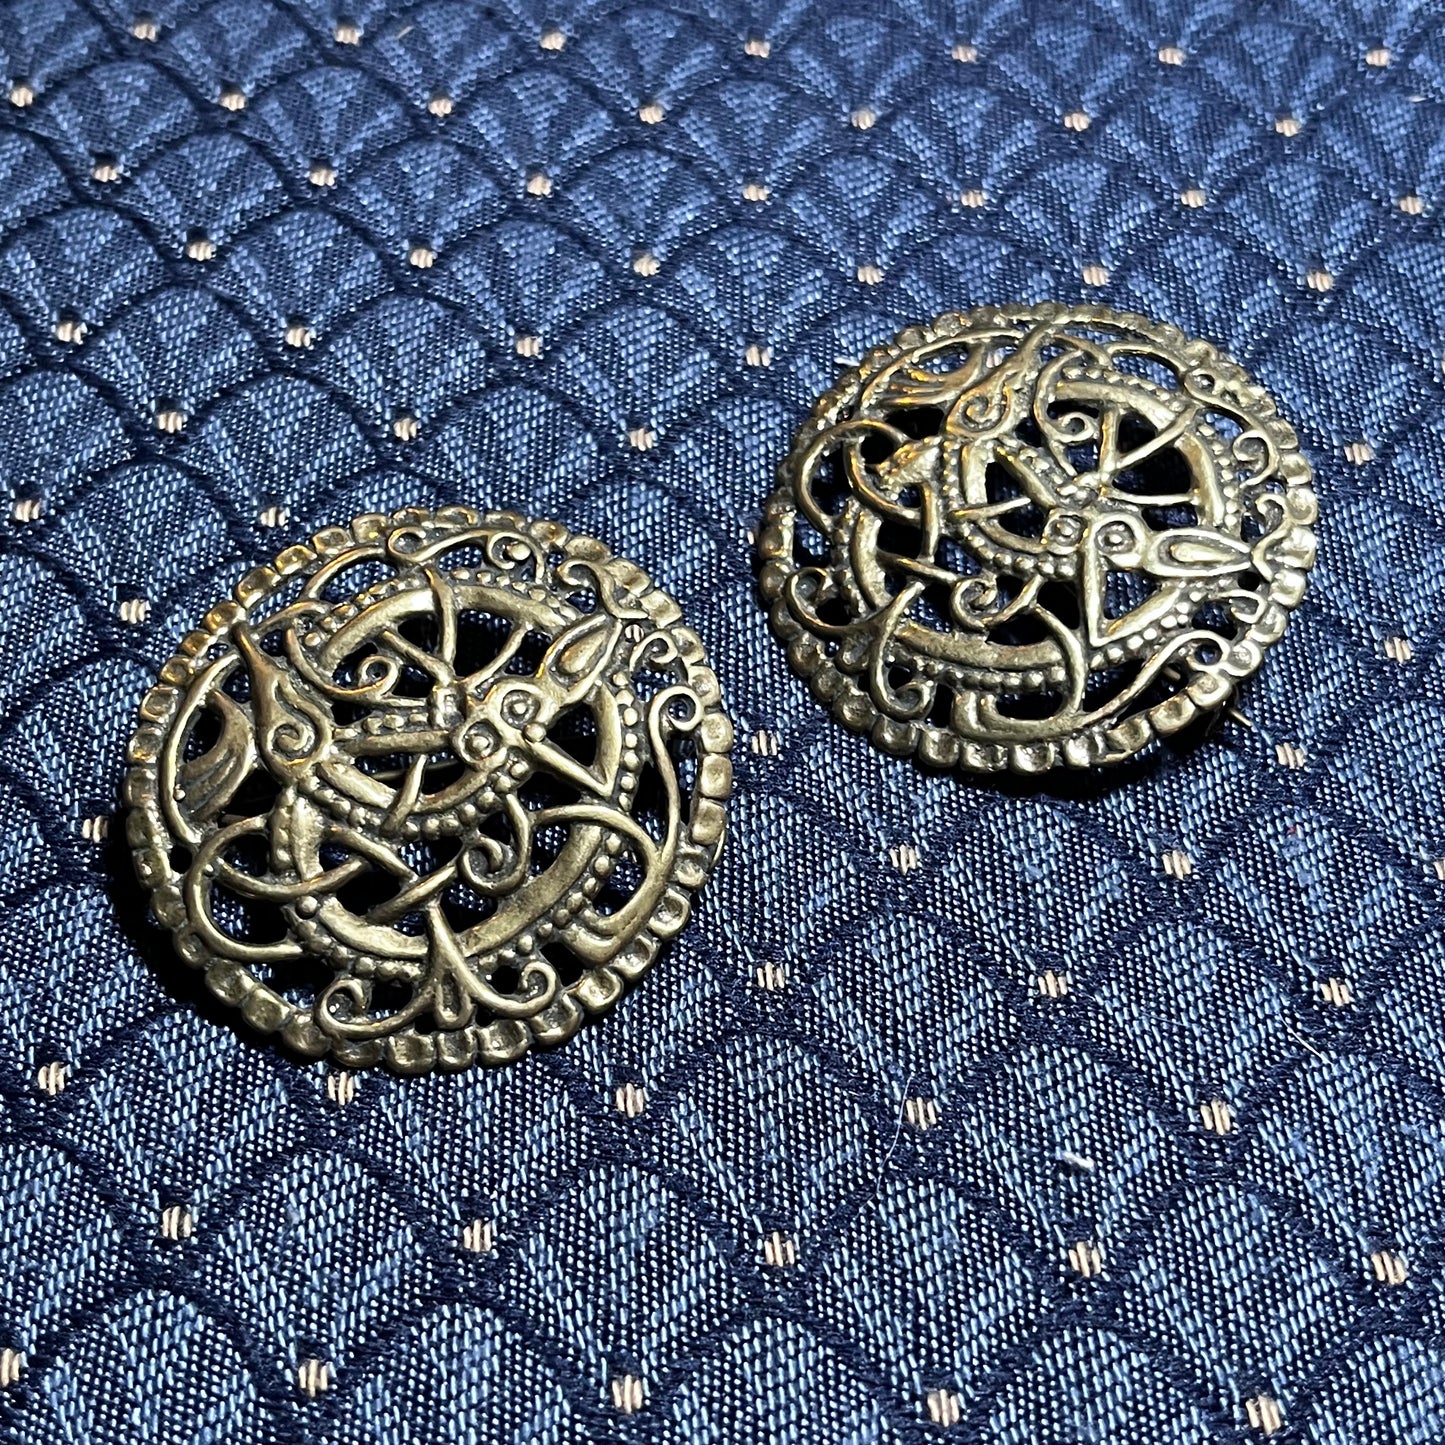 5 cm Viking Disc Urnes-style Brooches (set of 2) - Replica of Pitney Brooch